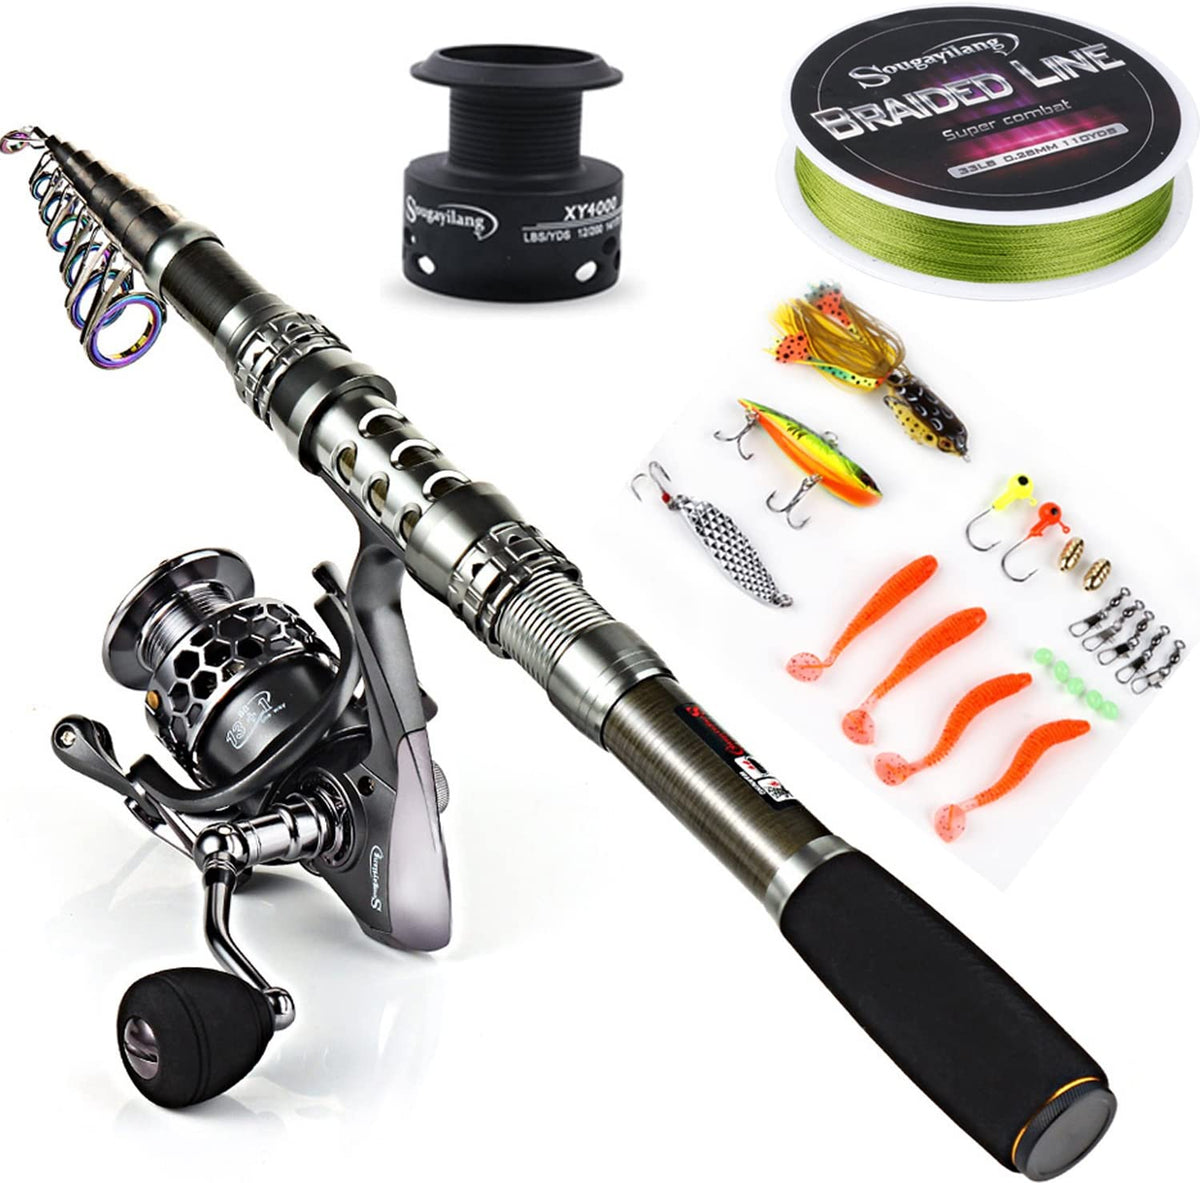 Spinning Fishing Rod Combo Fishing Rod Spinning Reels Set Outdoor Fishing  Supplies And Gear For Saltwater Freshwater And